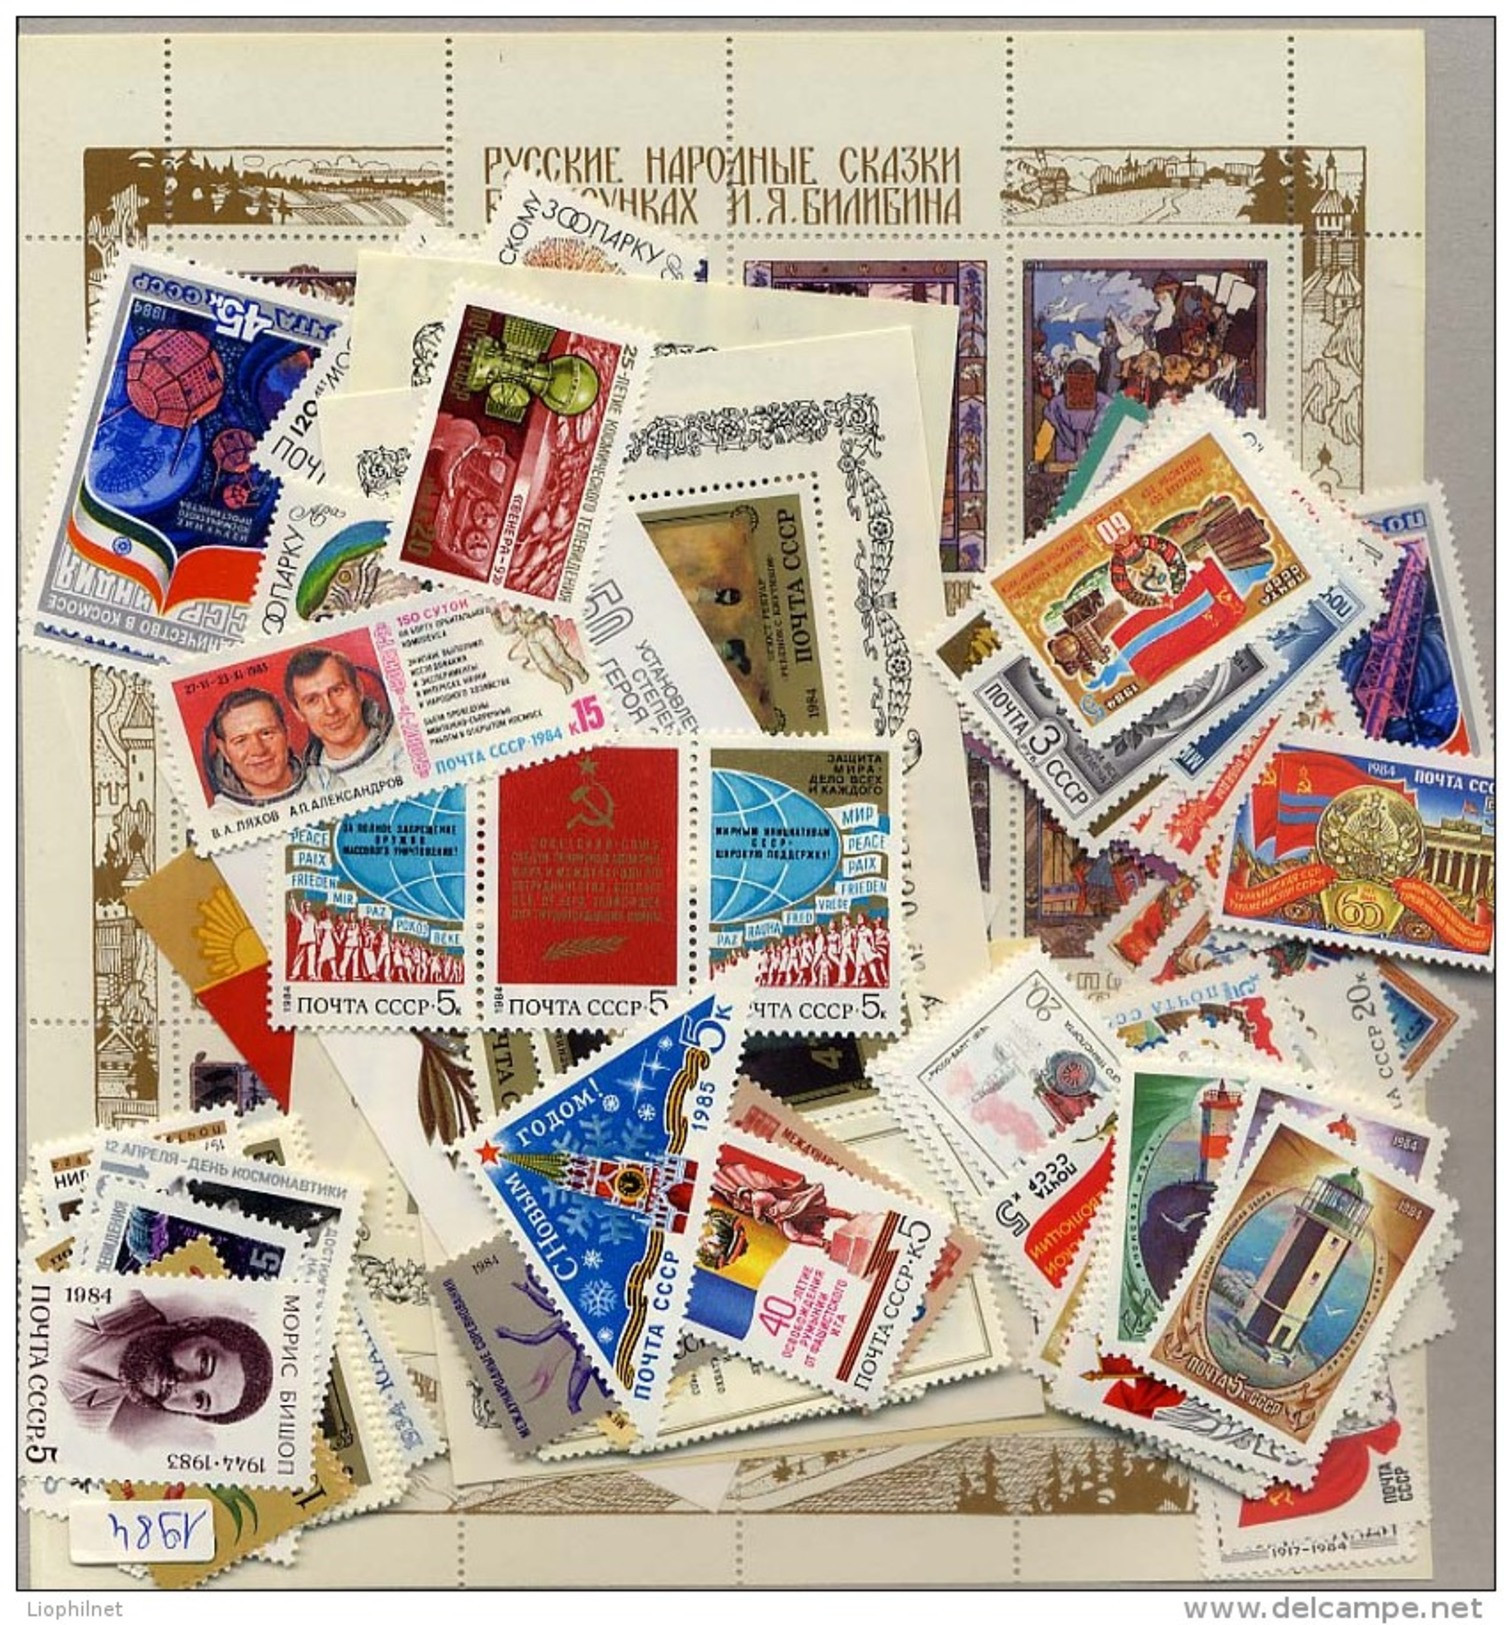 URSS SU 1984, ANNEE COMPLETE, COMPLETE YEAR SET, STAMPS + S/S, TIMBRES ET BLOC, NEUFS** MINT** - Años Completos